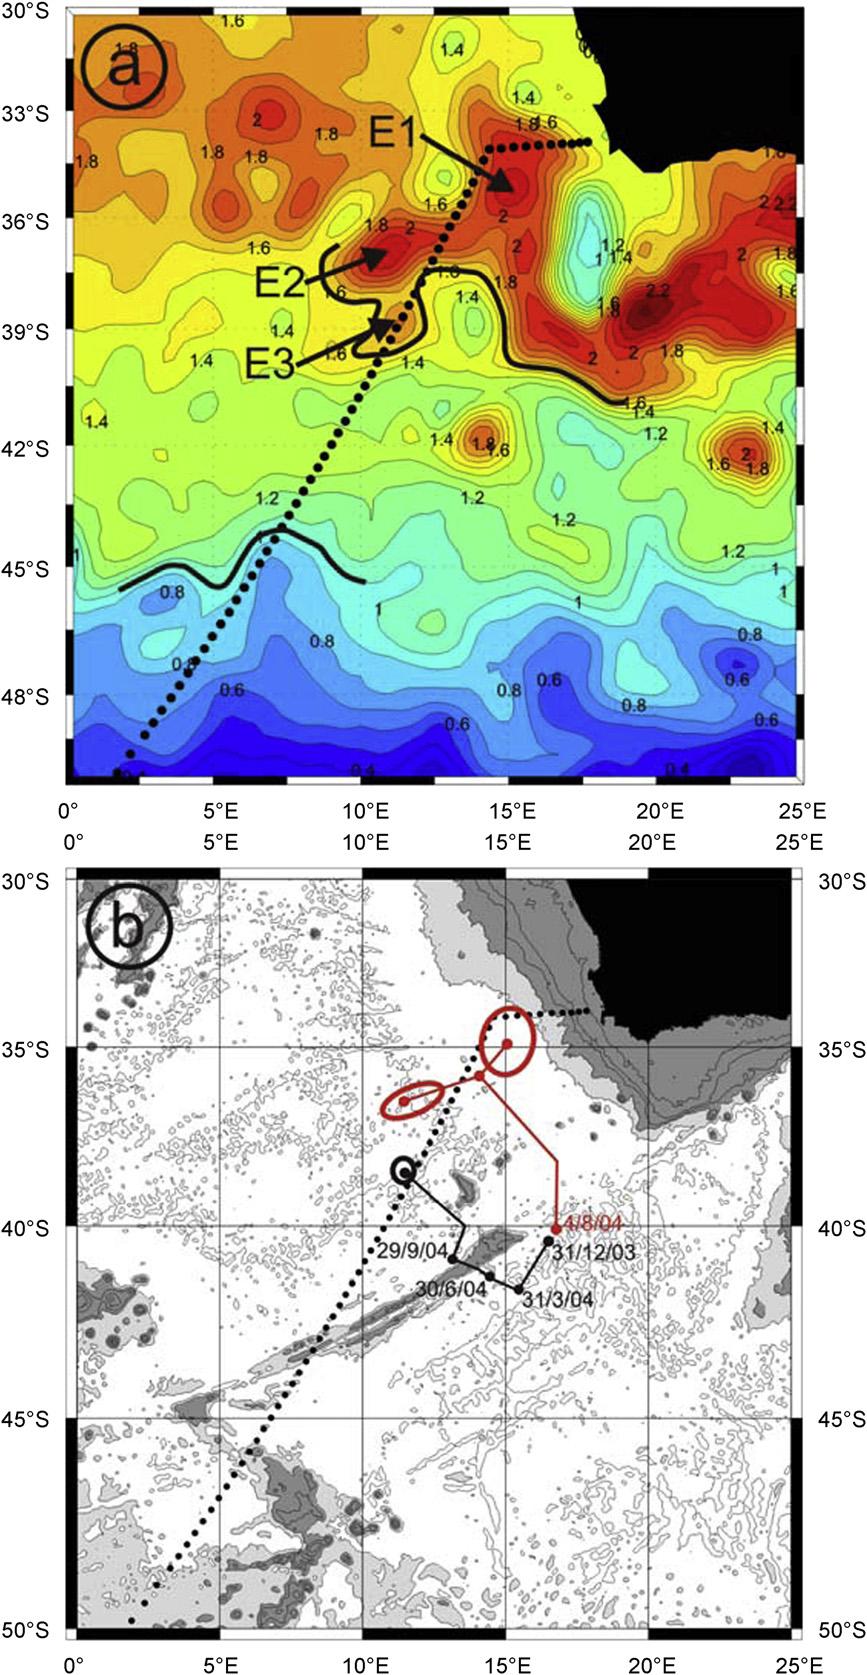 S. Gladyshev et al. / Deep-Sea Research I 55 (28) 1284 133 1293 Fig. 6. (a) Sea surface height (SSH) field at the time of the cruise, showing eddies E1, E2 and E3.